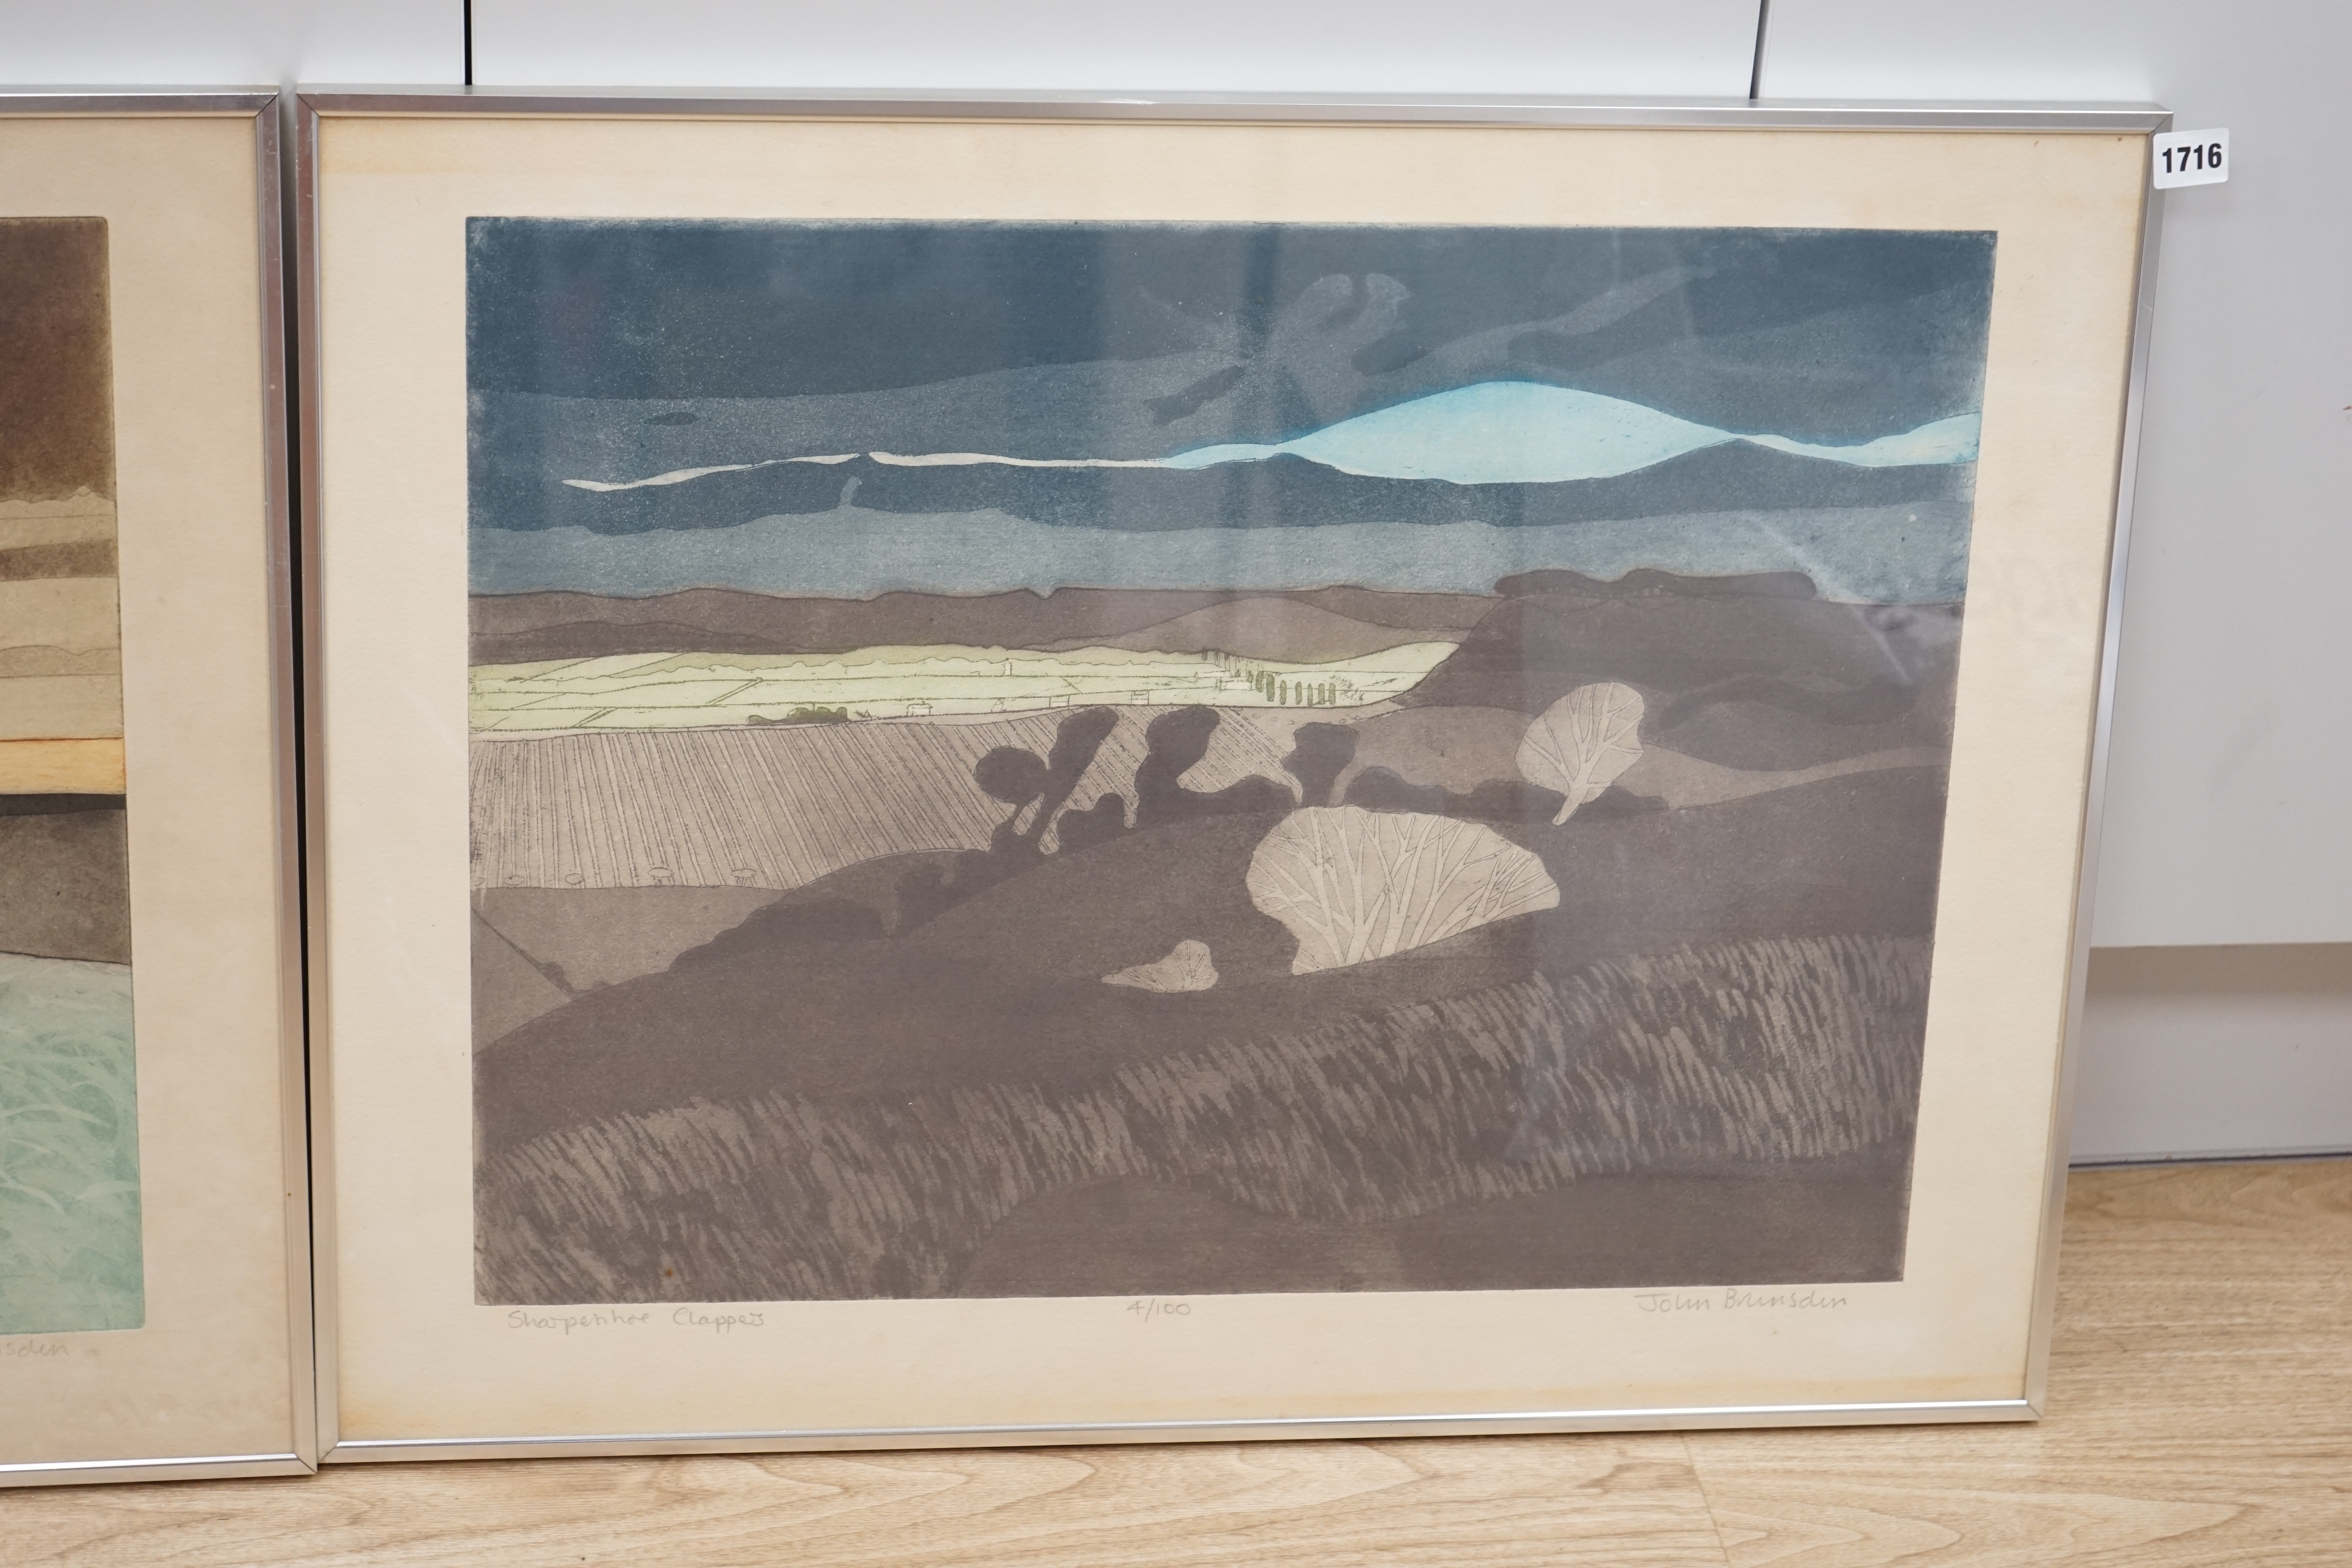 John Brunsdon (1933-2014), pair of etchings with aquatint, 'Evening light on the Gower' and one other, each limited edition, signed in pencil, 54 x 71cm. Condition - poor to fair, browning and discolouration to paper